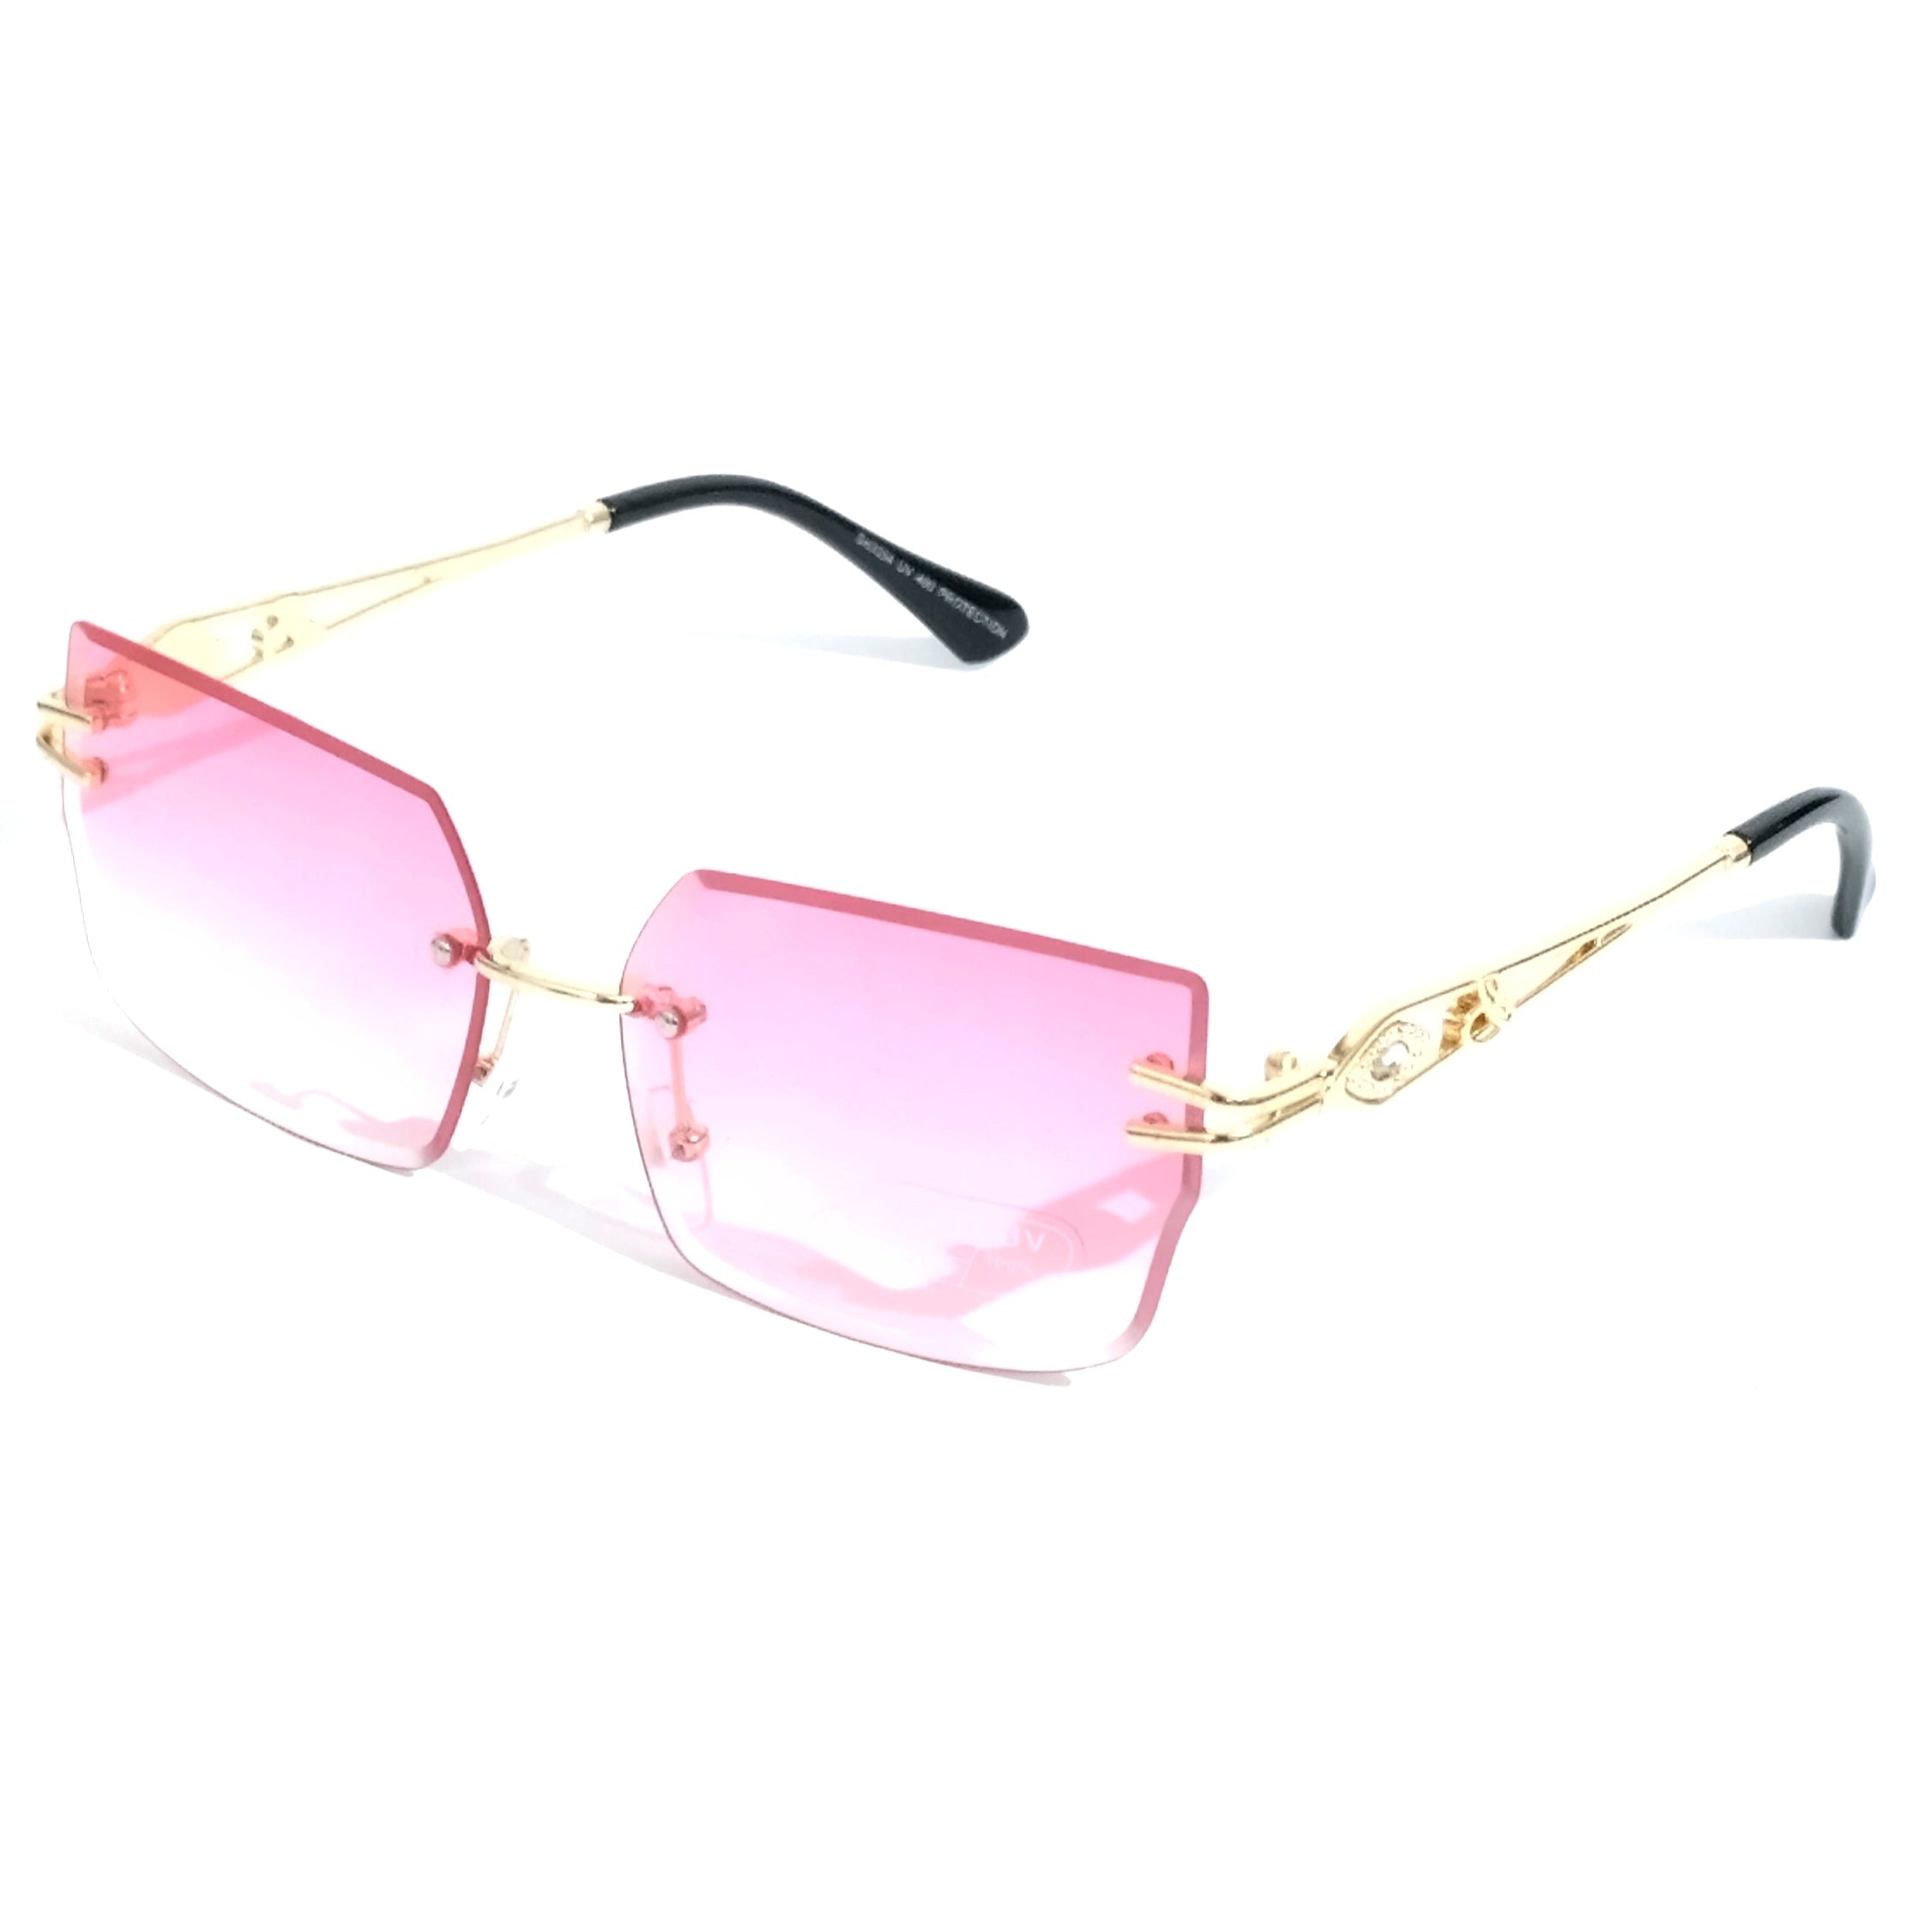 Buy Fashion Sunglasses Rectangle Rimless Multi Color Lenses Hip Hop Style  Gold Metal Frames for Men and Women Online in India - Etsy